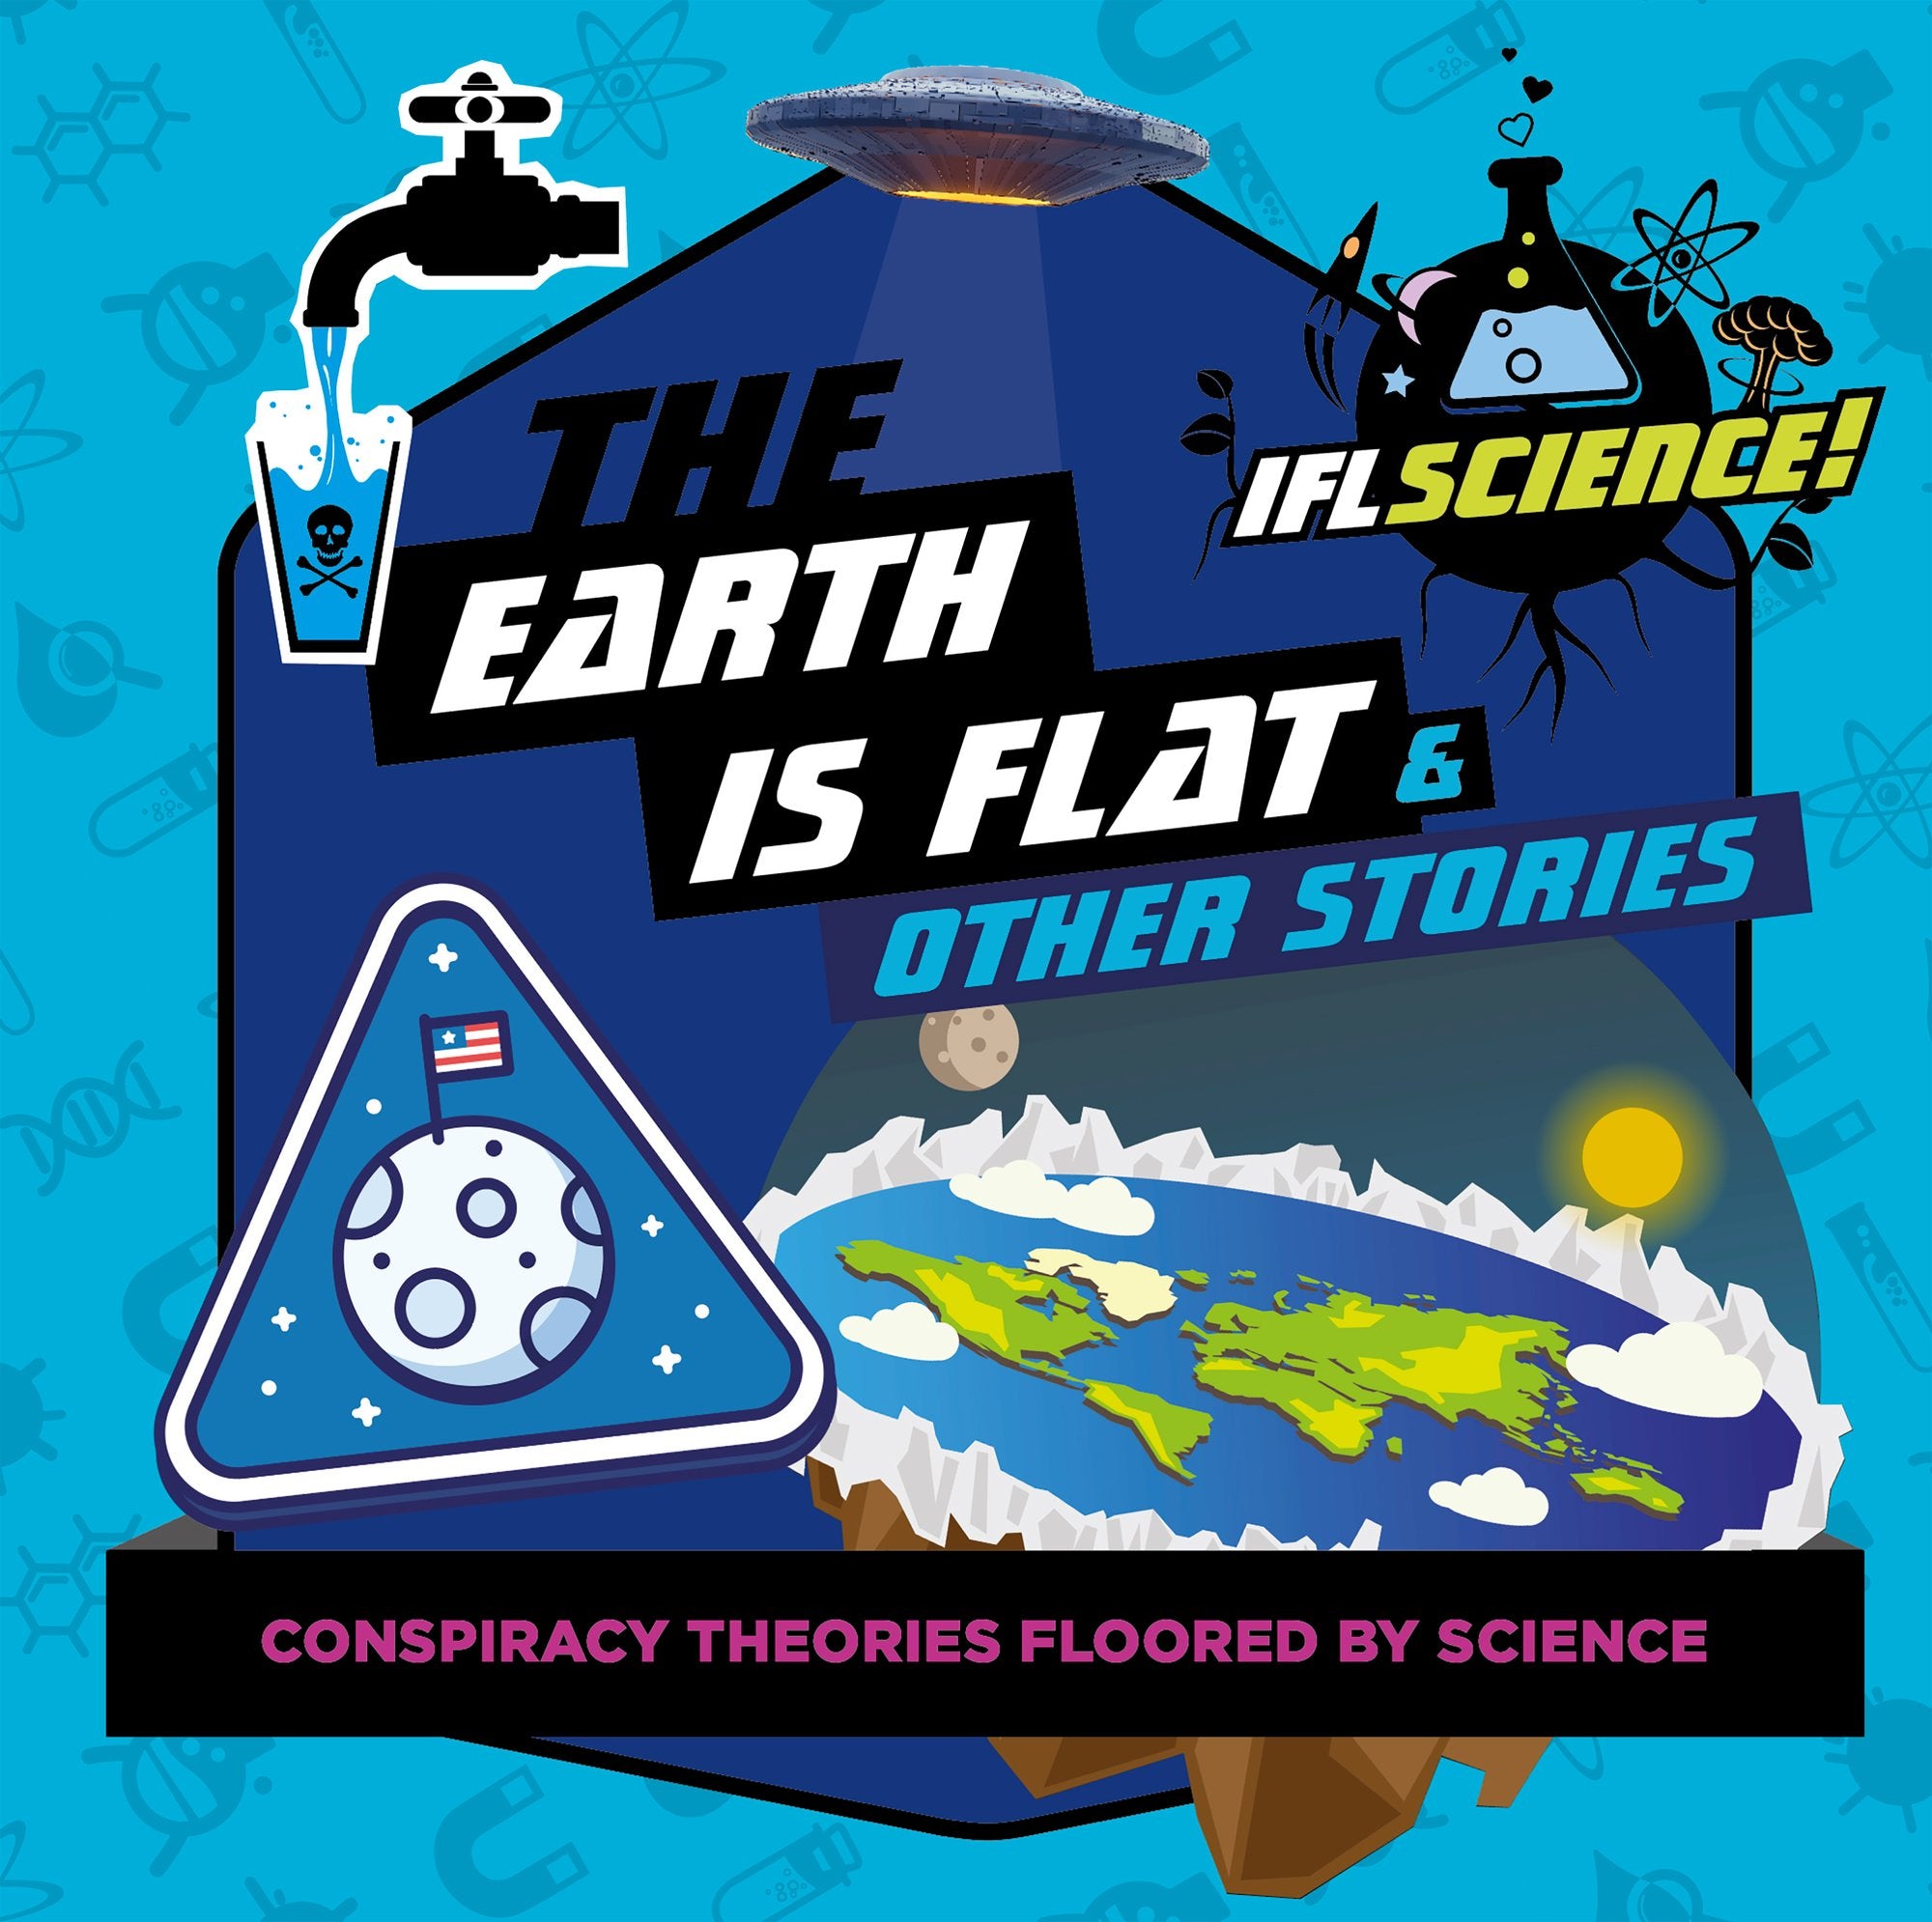 IFLScience: The Earth Is Flat & Other Stories